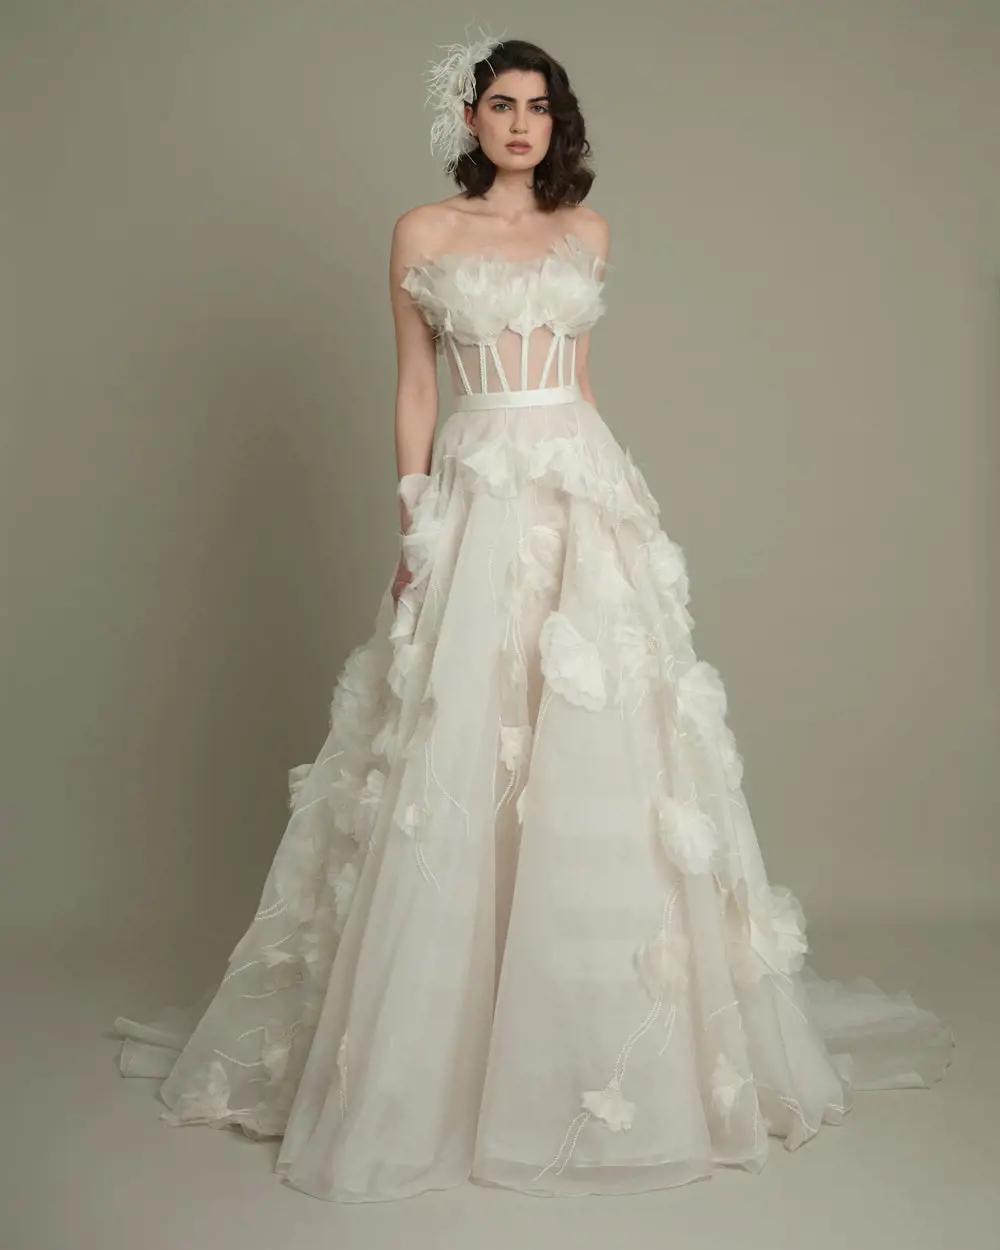 Gemy Maalouf Fall 2023 Collection Trunk Show